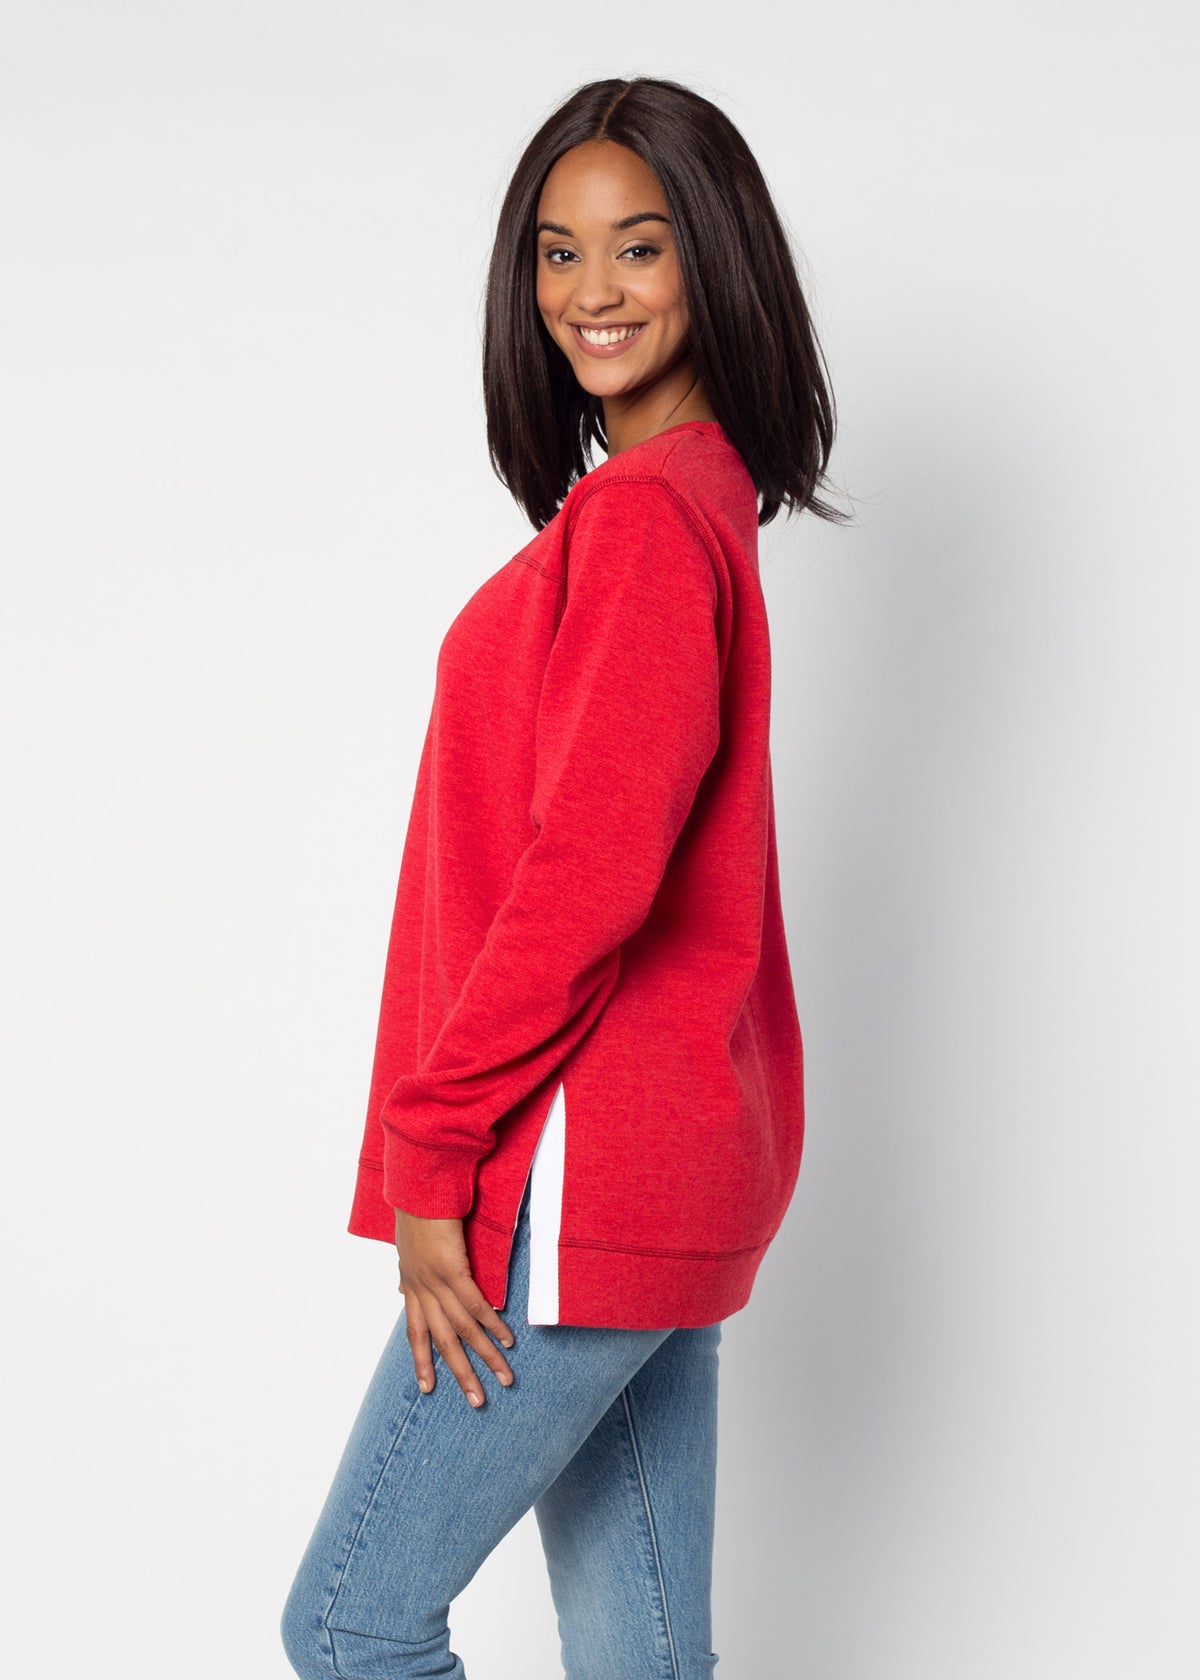 Back To Basics Tunic Texas Tech Red Raiders in Red